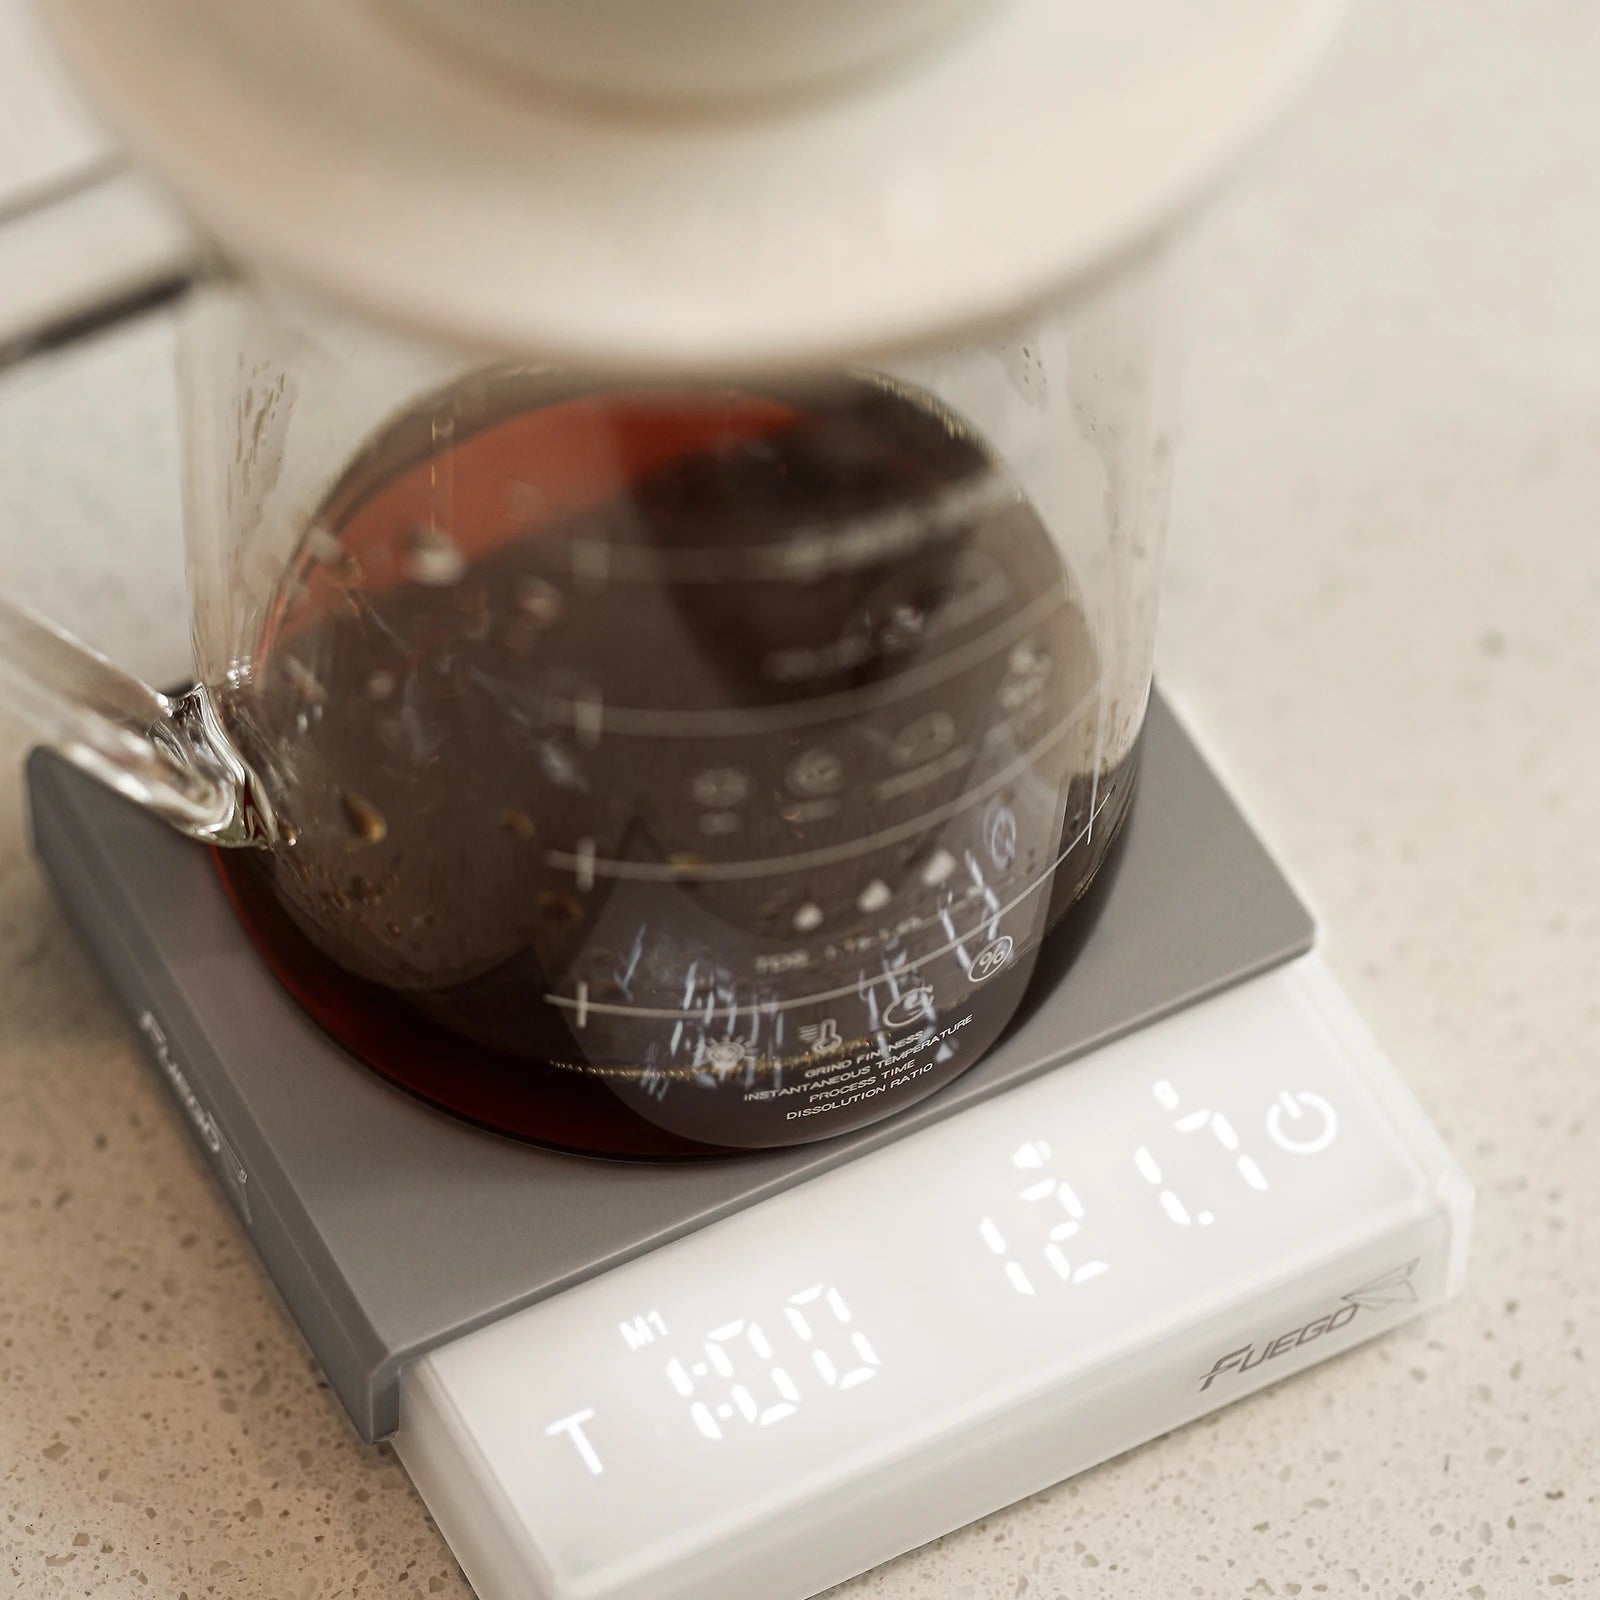 Rechargeable Digital Coffee Scale with Timer - High Precision 0.1g for Drip and Espresso Brewing